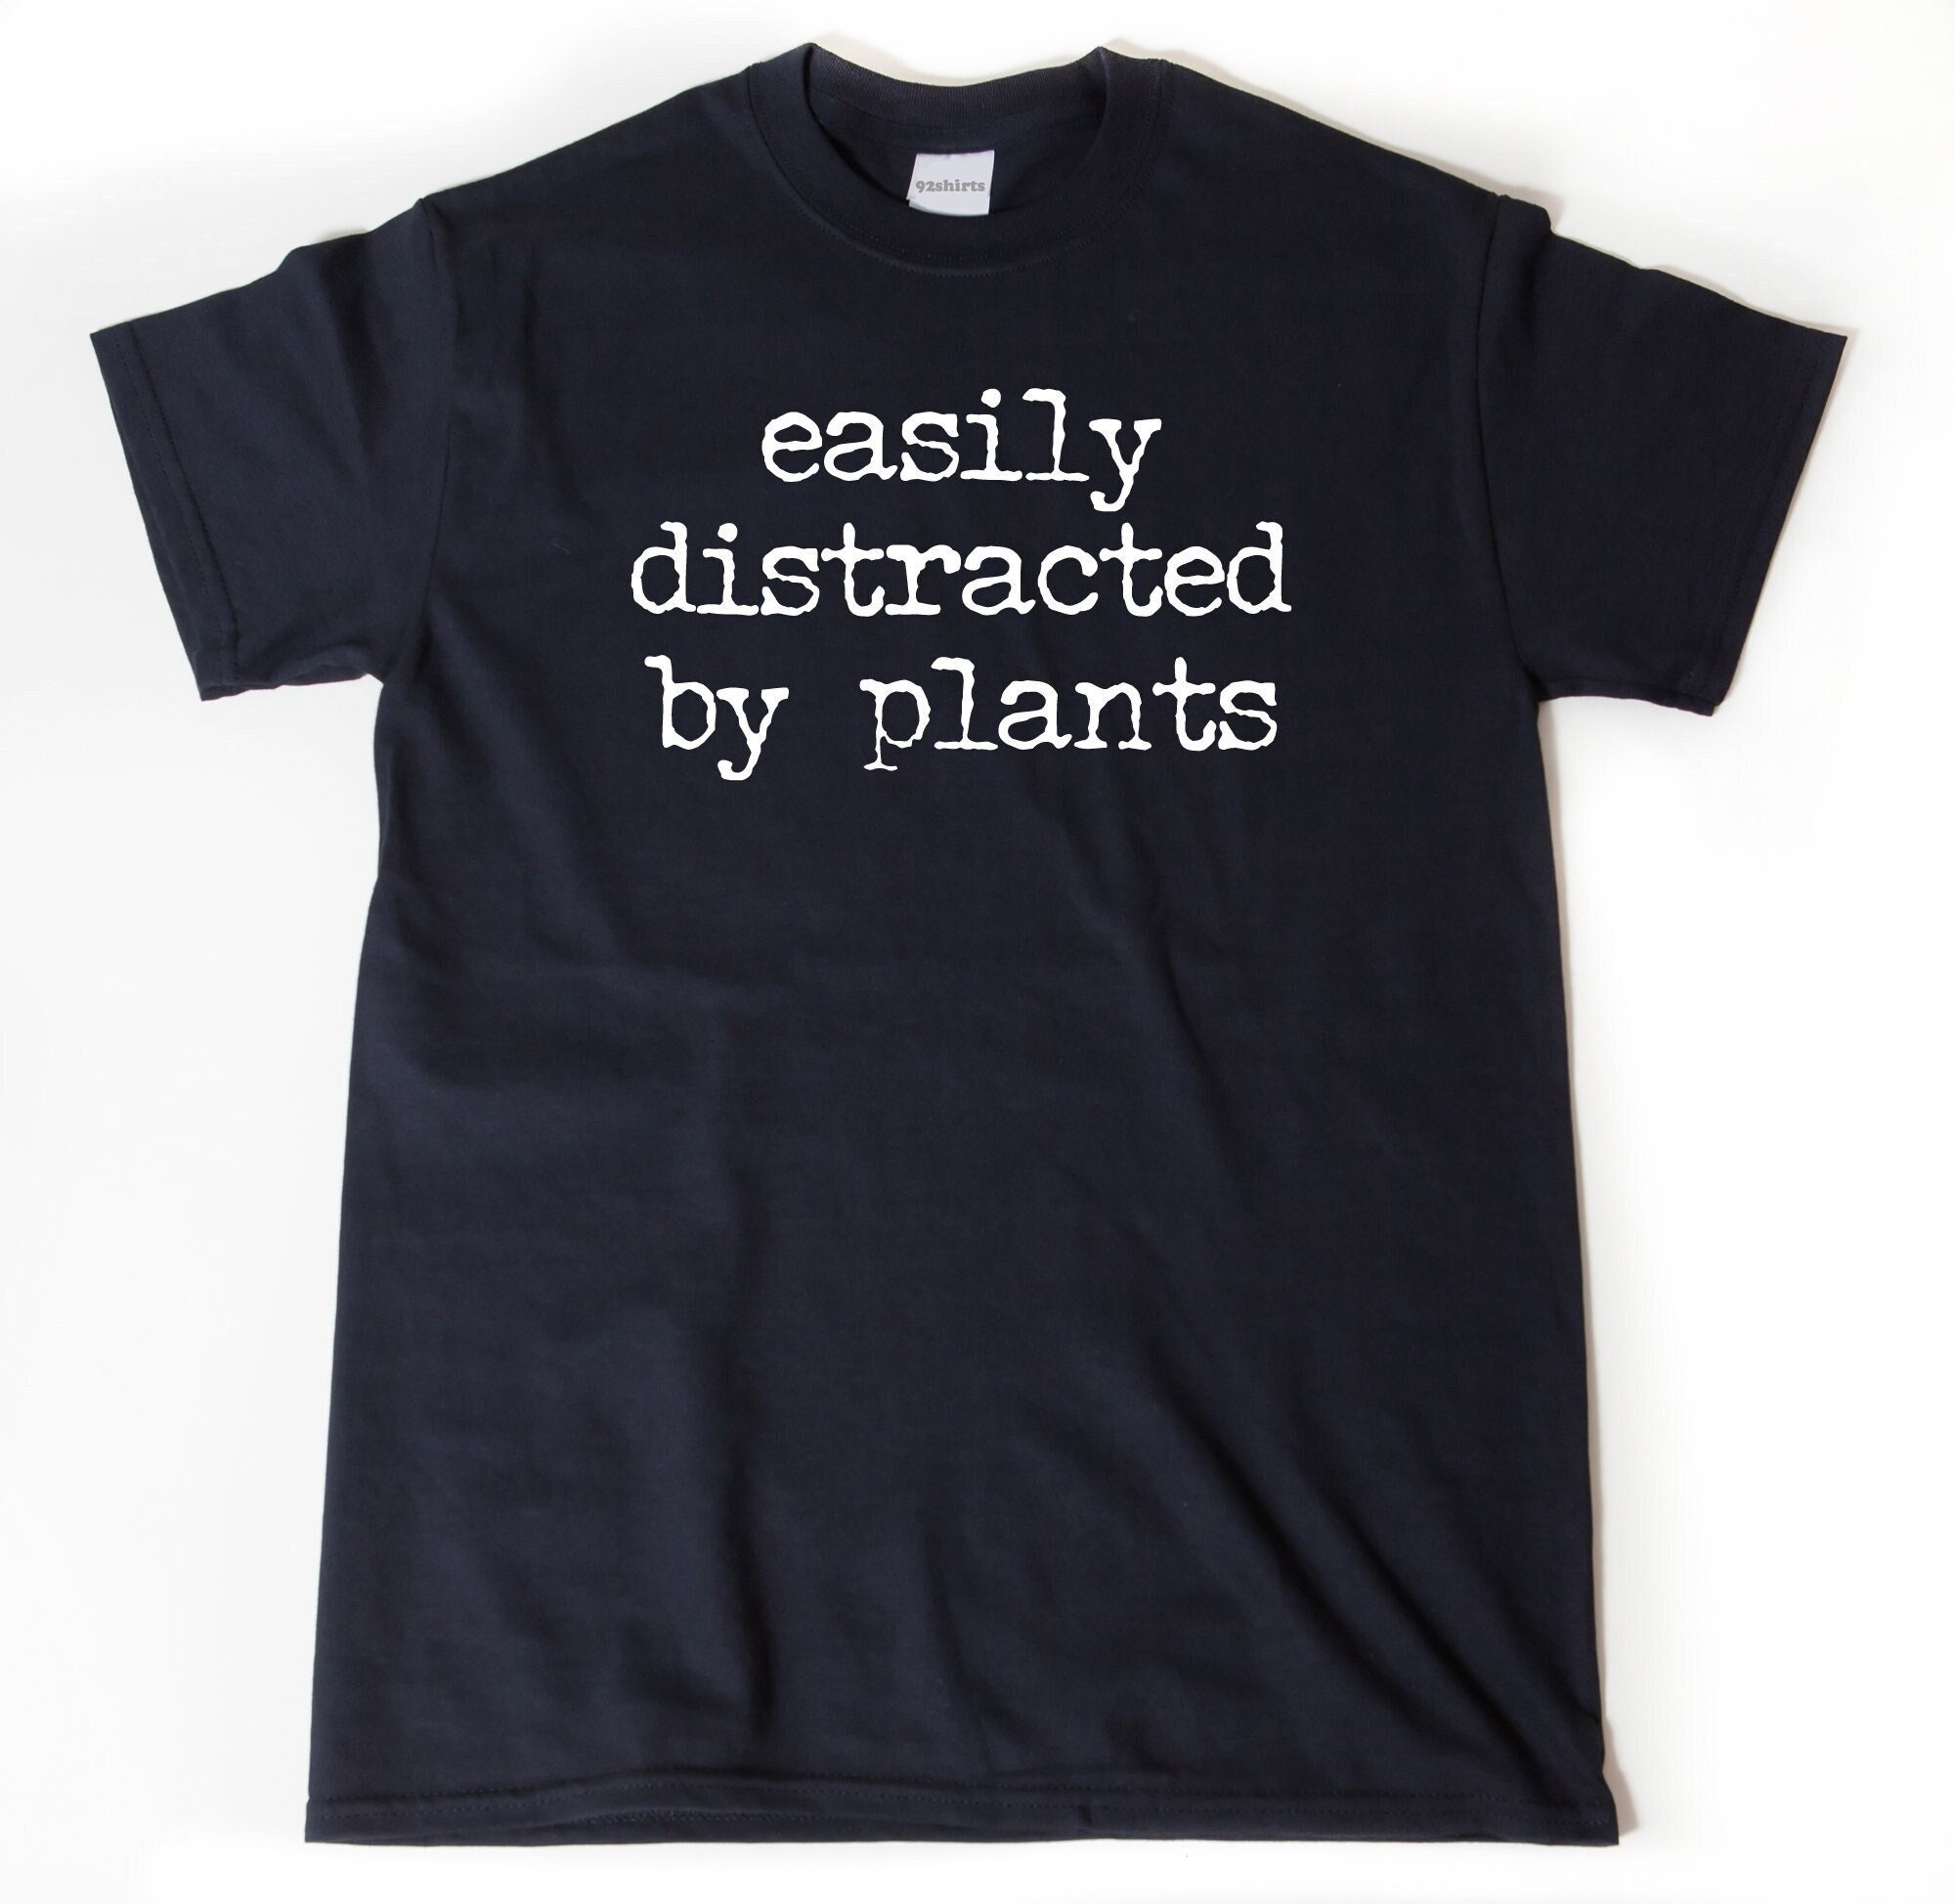 Easily Distracted by Plants Shirt, Funny Plant Lady Shirt, Gardening Shirt,  Cute Gardening Shirt, Funny Plant Shirt, Funny Graphic Shirt 